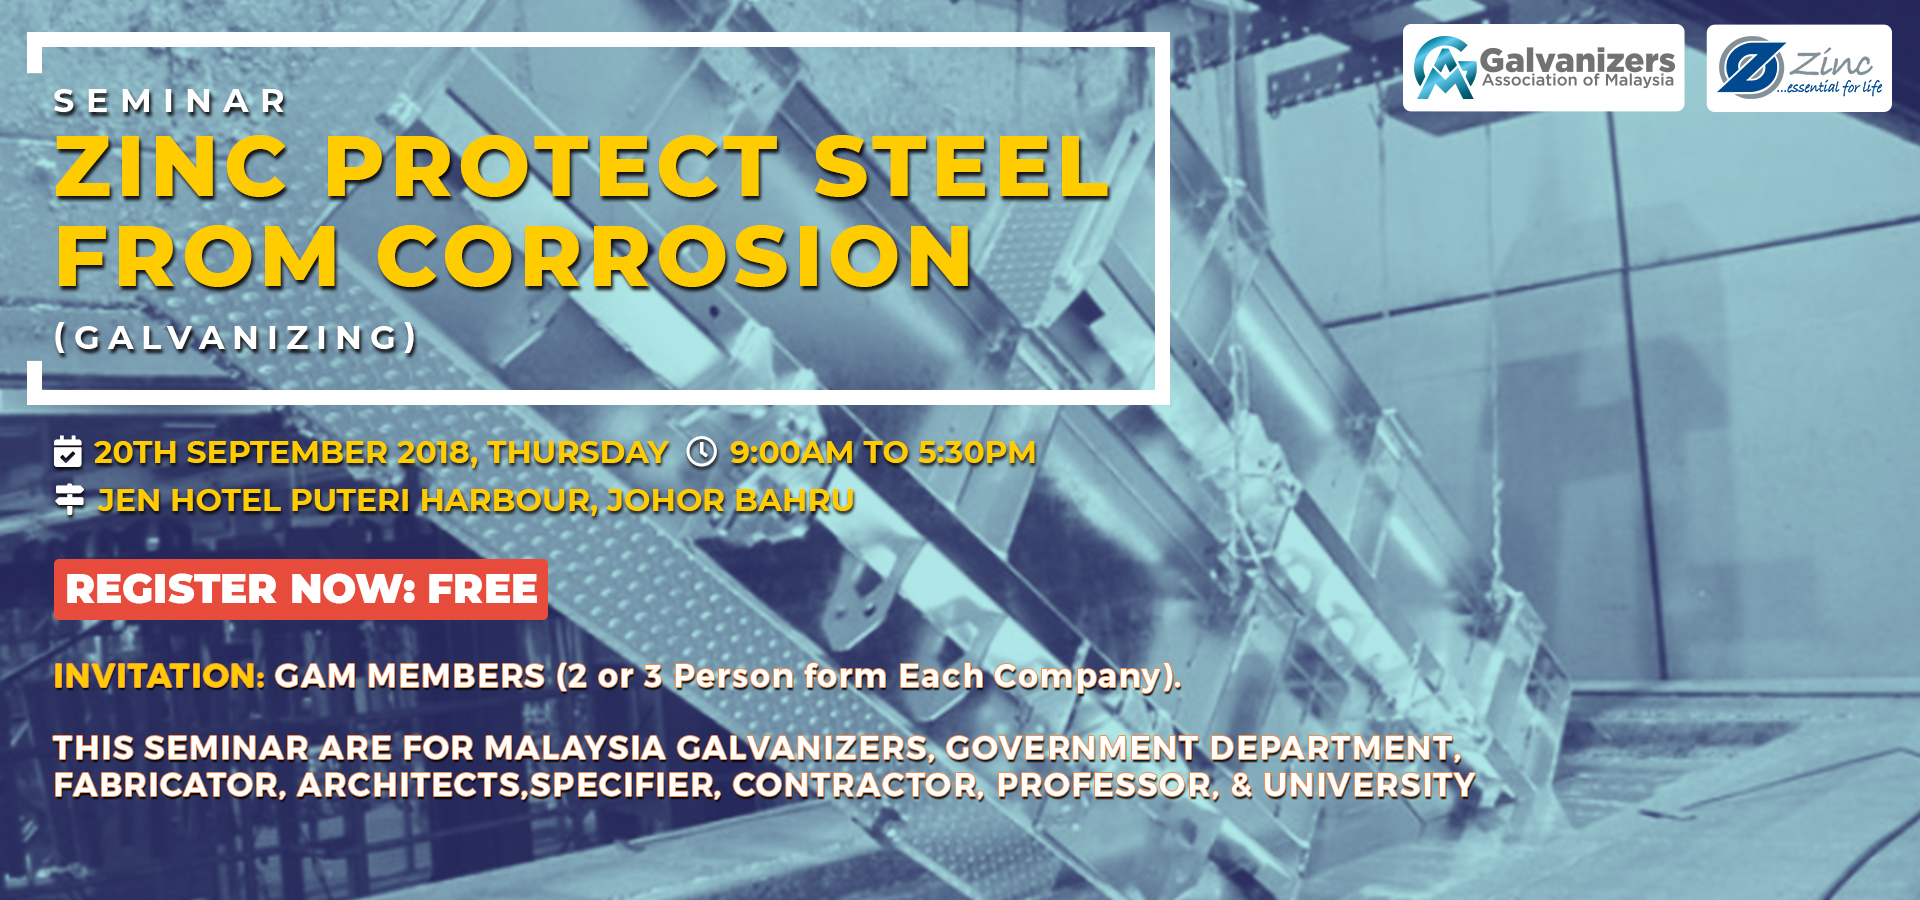 Upcoming Seminar: Zinc Protect Steel From Corrosion (Galvanizing ...